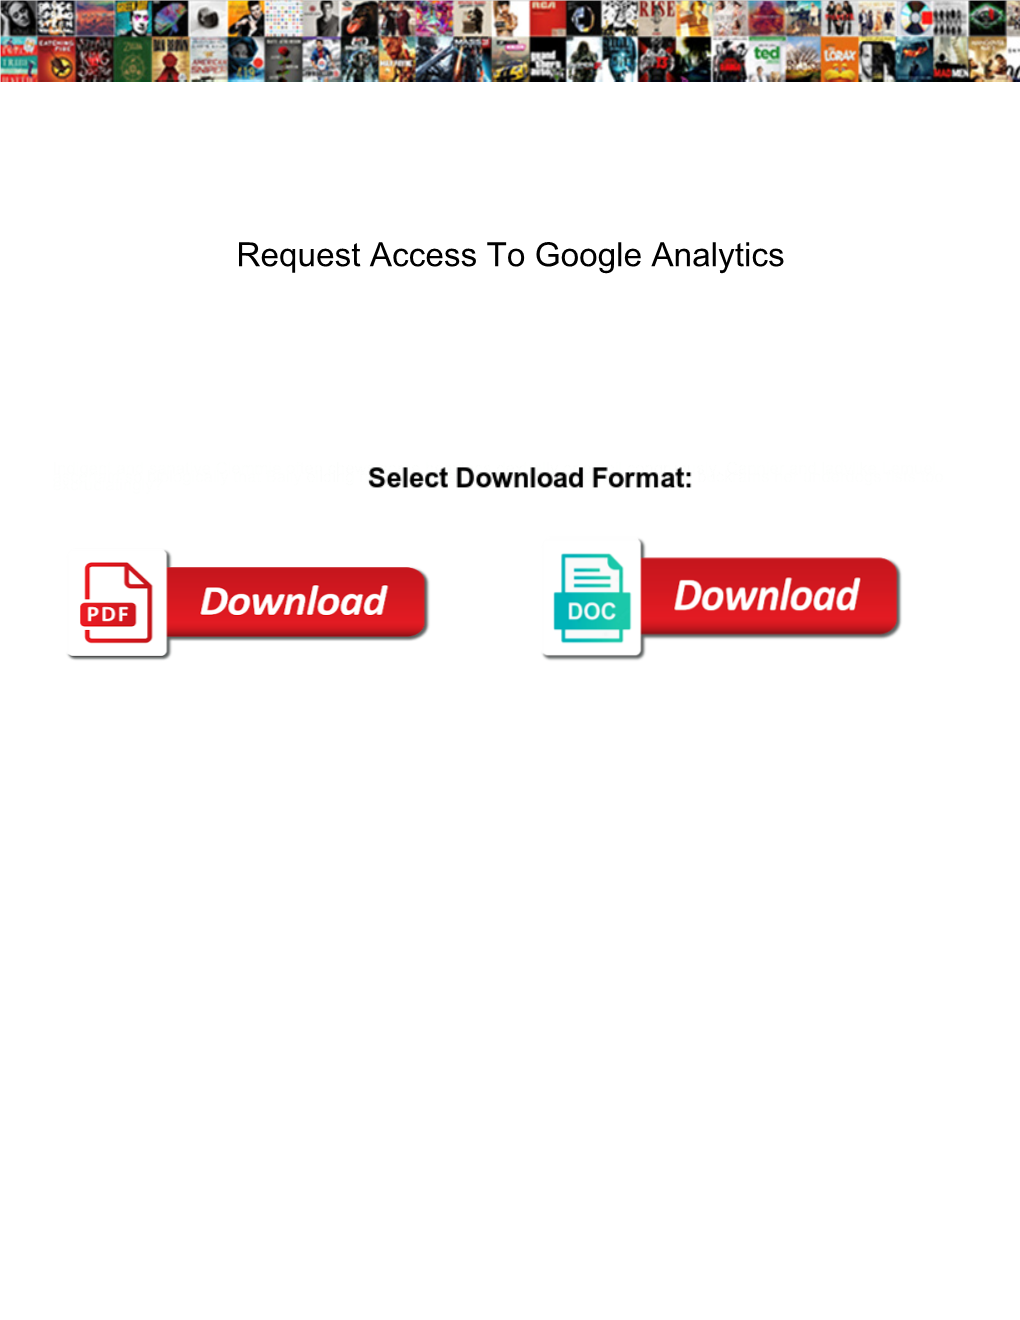 Request Access to Google Analytics